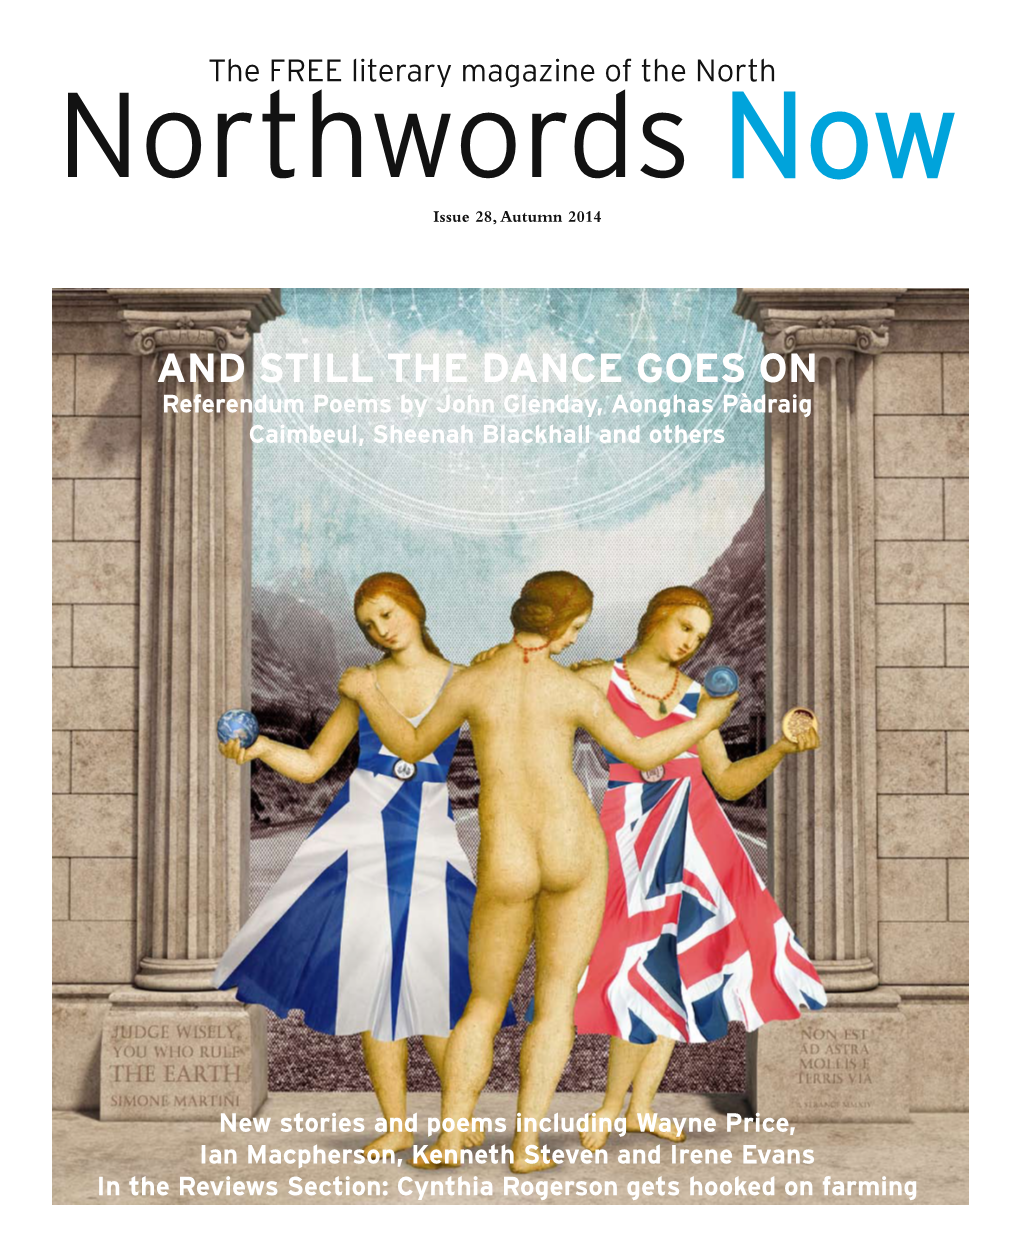 Download Northwords Now to an E-Reader